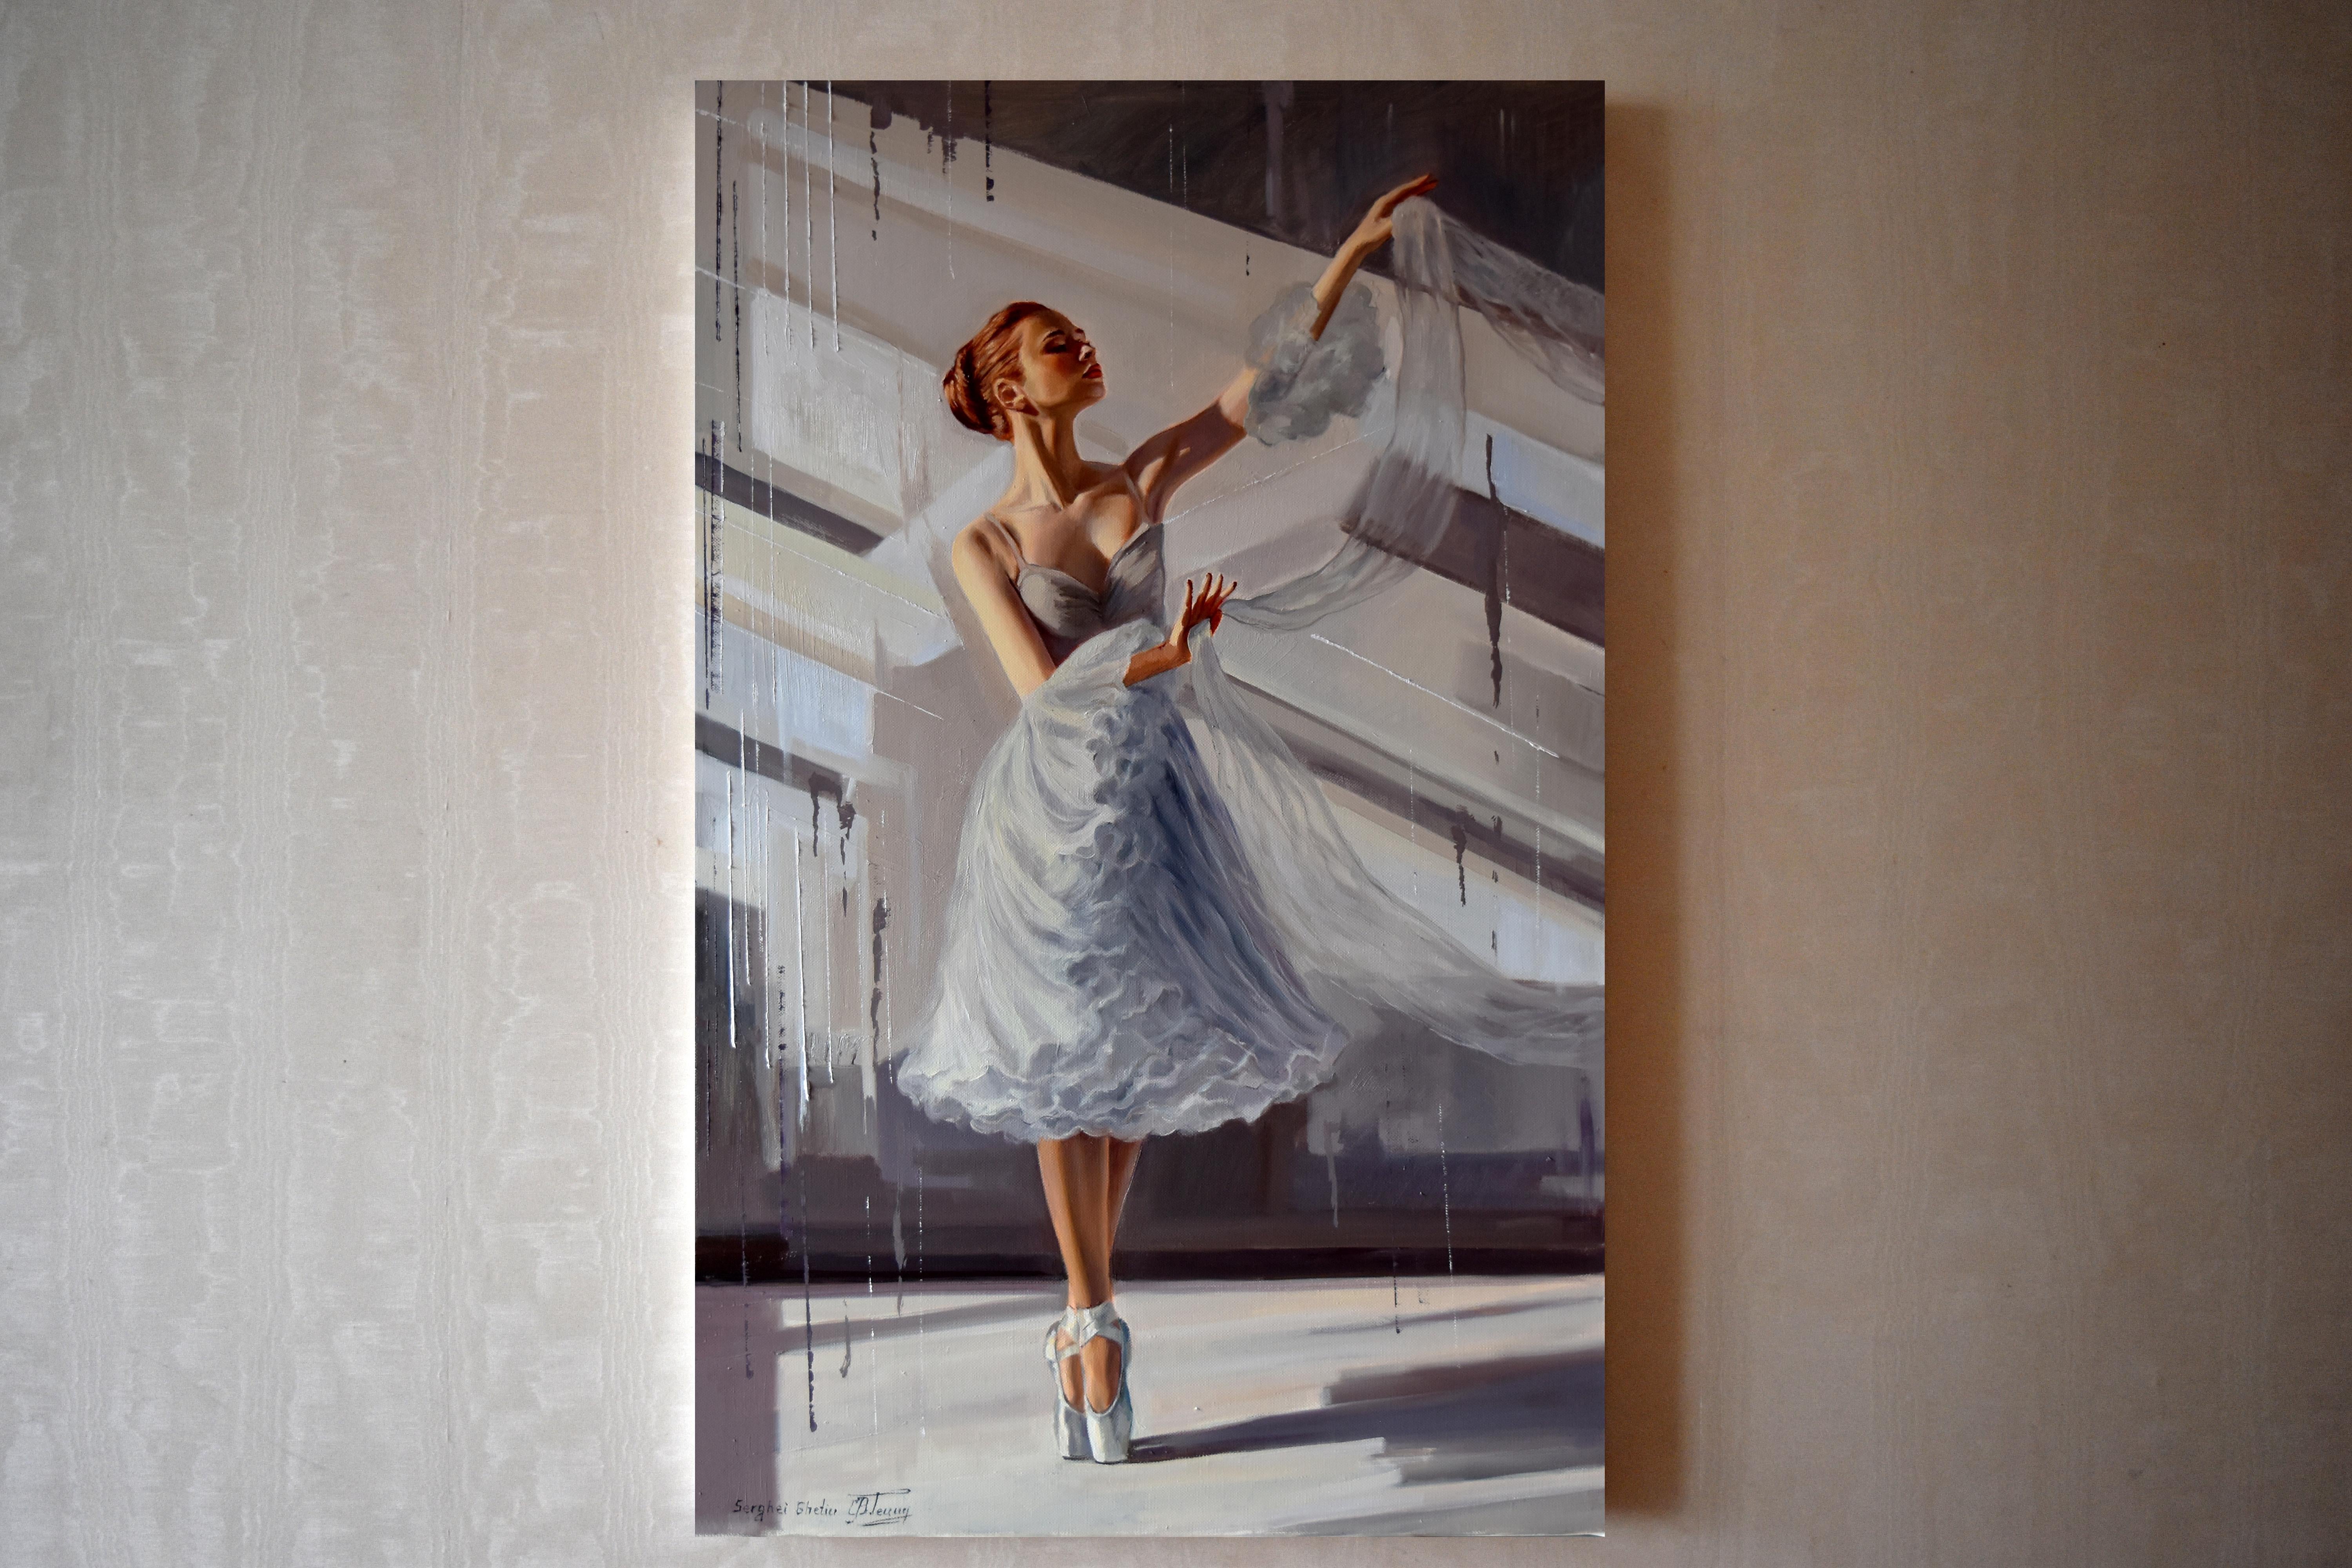 A continuation of the ballet topic. A beautiful ballerina in a dance moving. Realistic contemporary art with dancing ballerina. Combination of oil paints with acrylic underpainting. Professional paints on linen canvas.